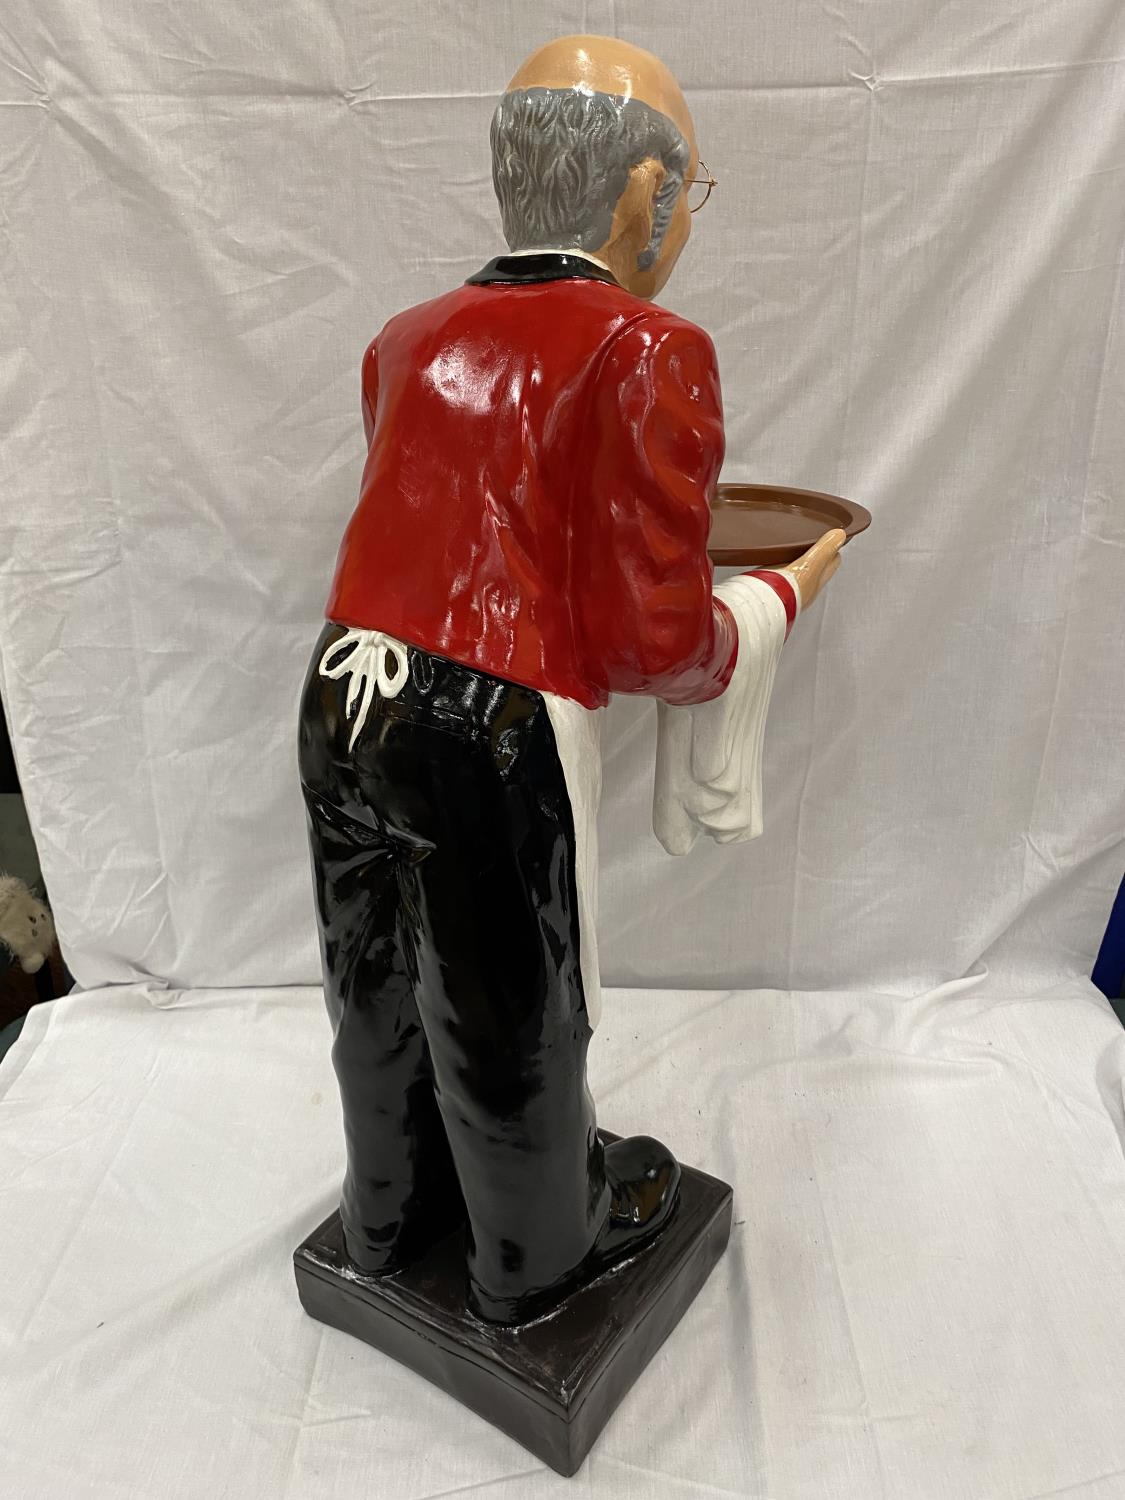 A DUMB WAITER DEPICTING A BUTLER IN A RED JACKET WITH A TRAY HEIGHT 96CM - Image 7 of 8